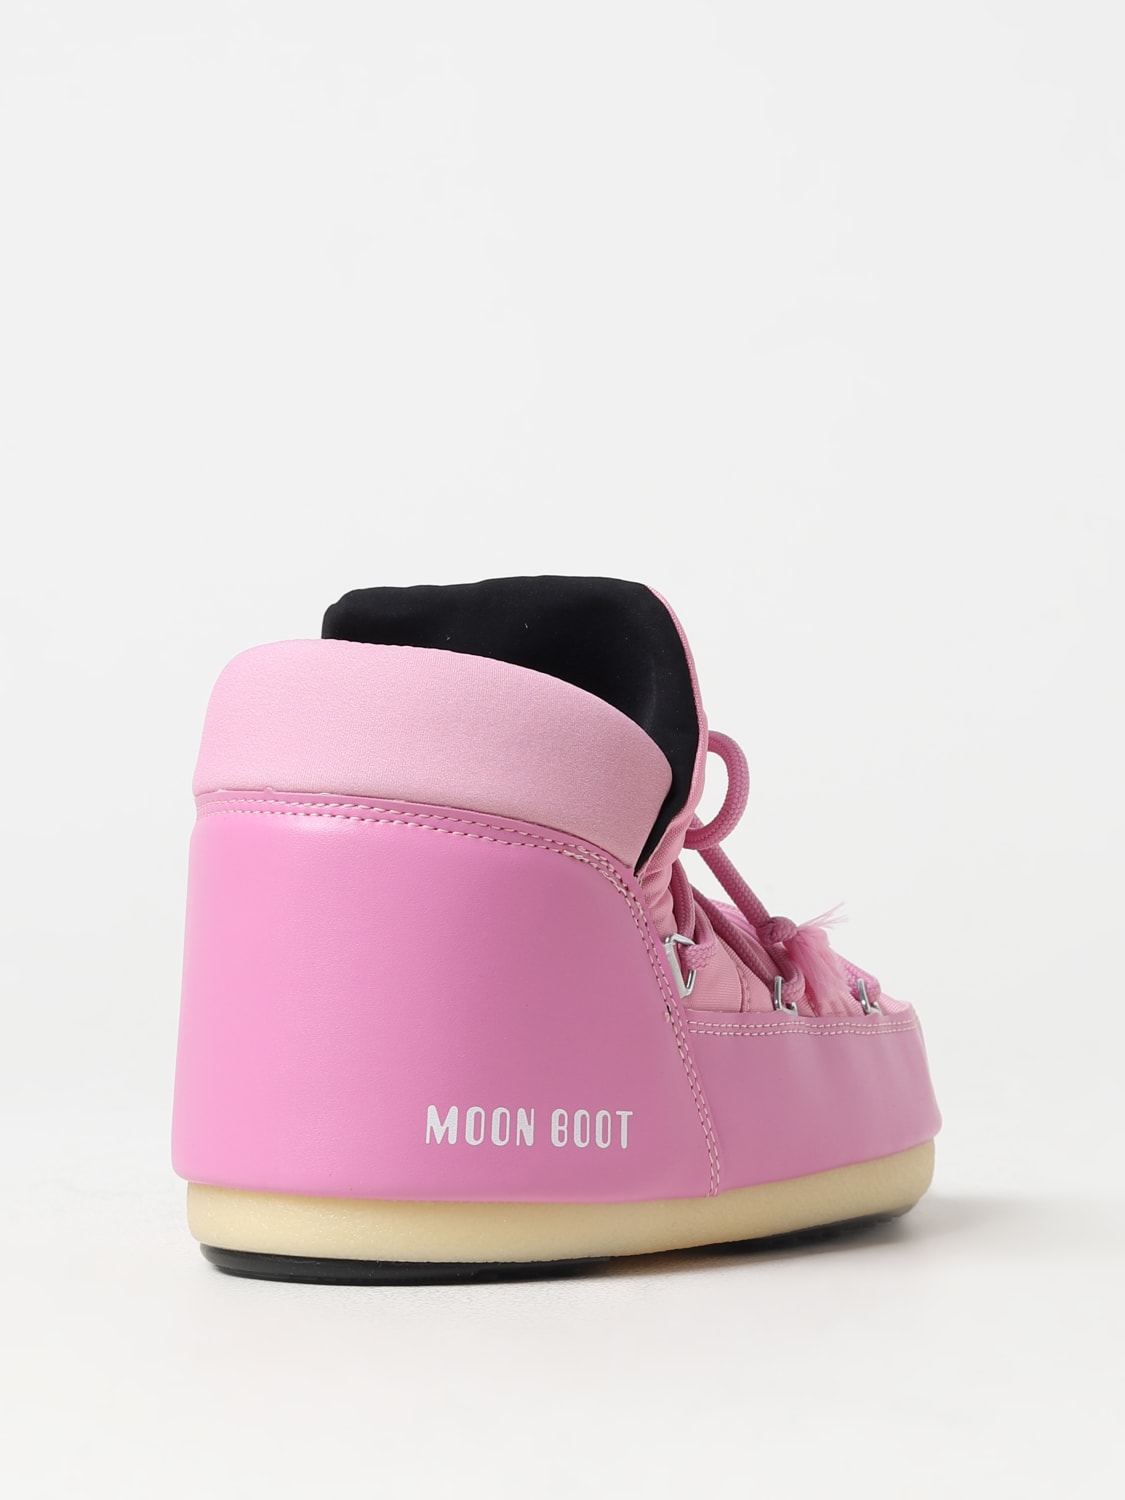 MOON BOOT Pink Classic